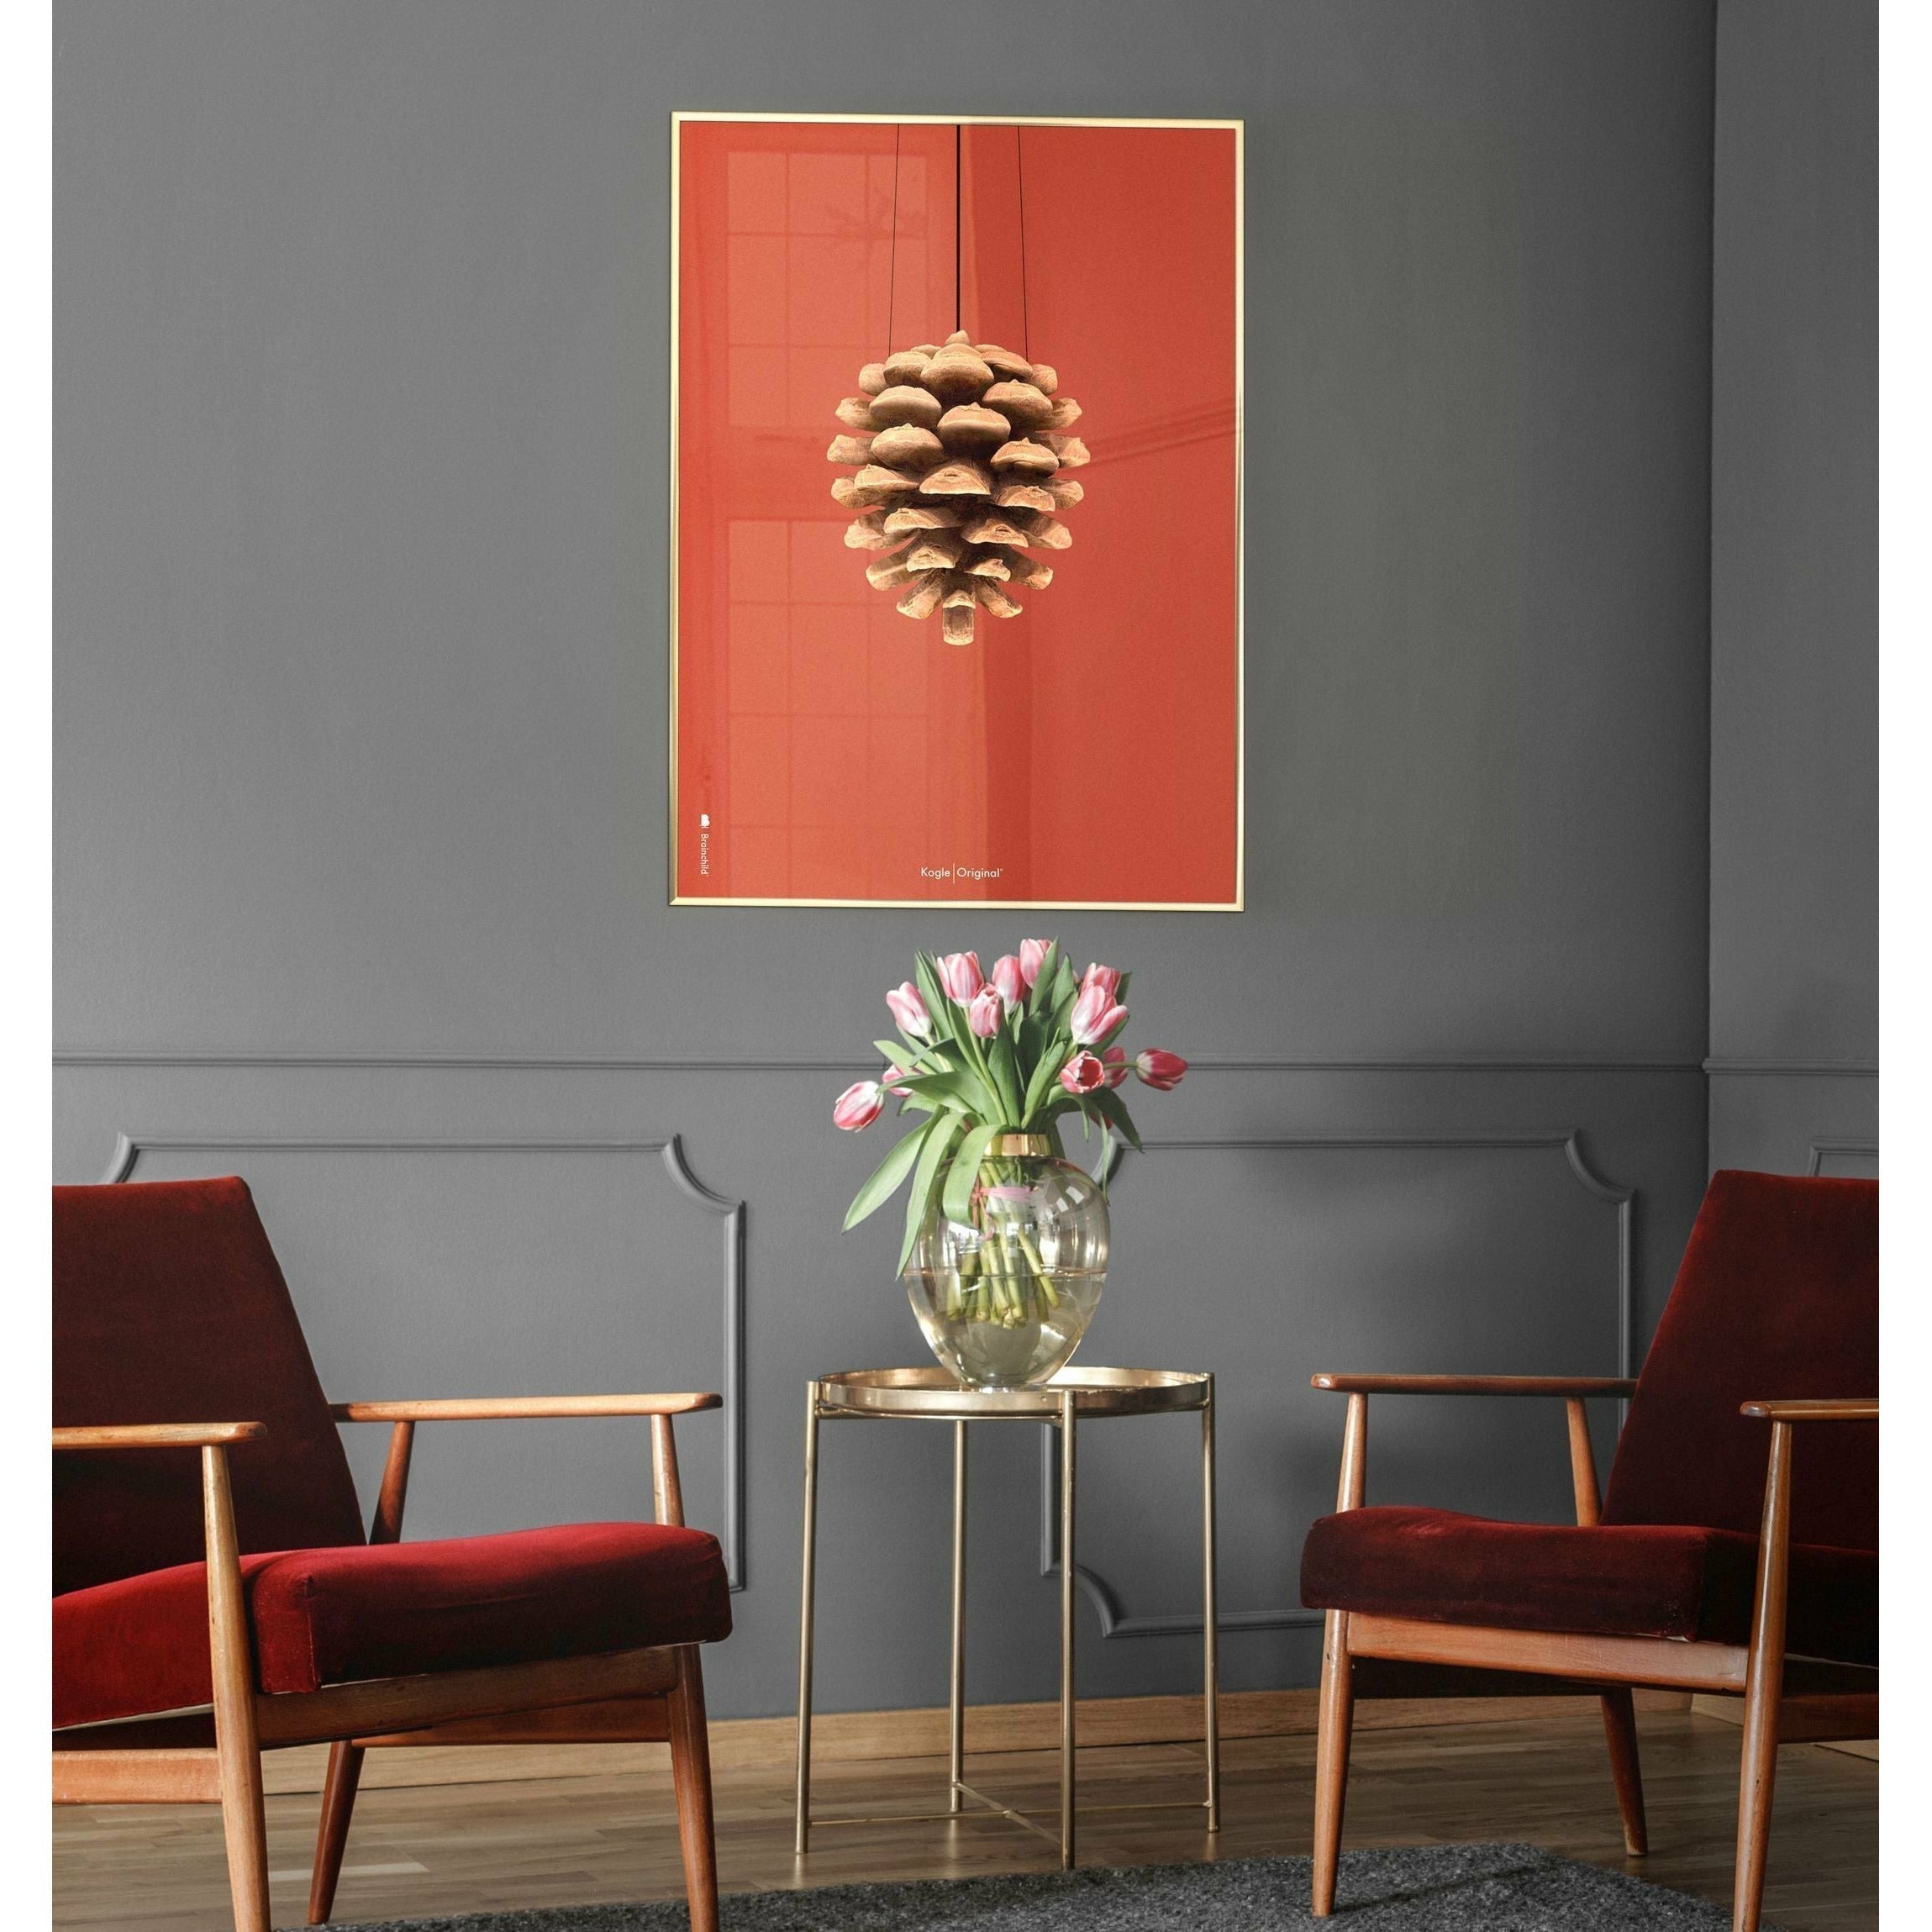 Brainchild Pine Cone Classic Poster, Frame Made Of Light Wood A5, Red Background